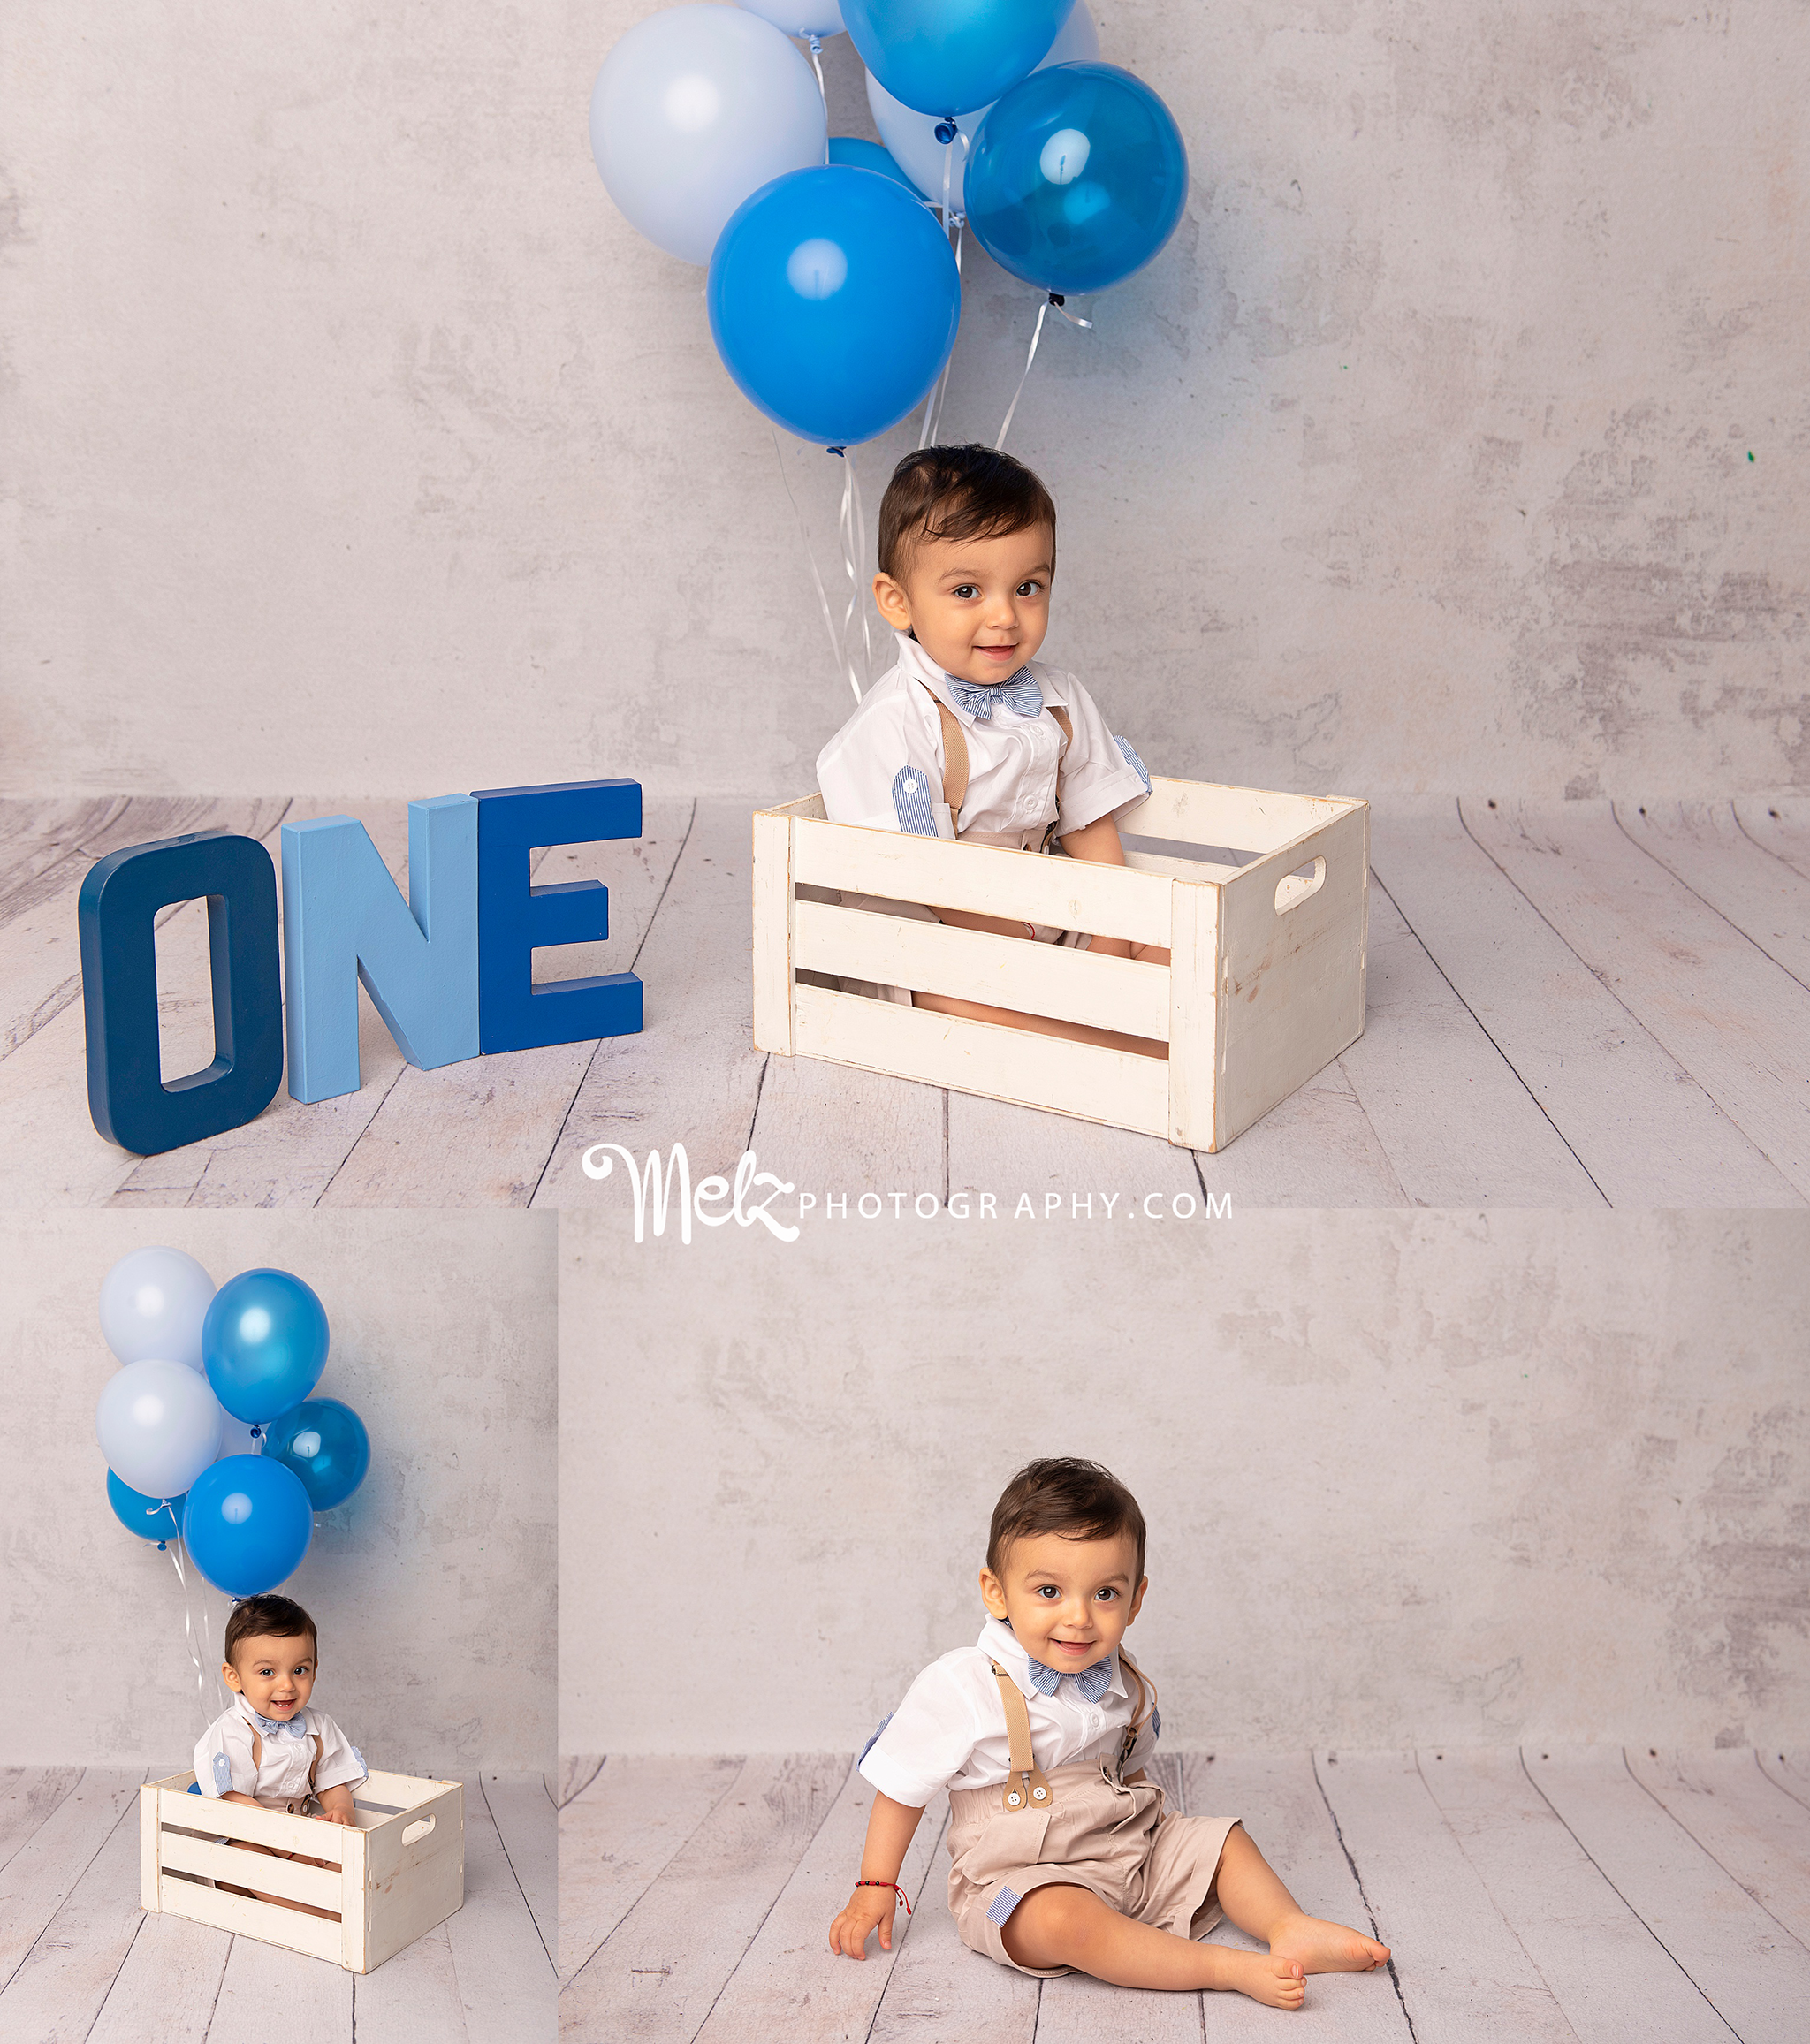 mateos-first-birthday-session-belleville-new-jersey-birthday-photographer-melz-photography-1.png